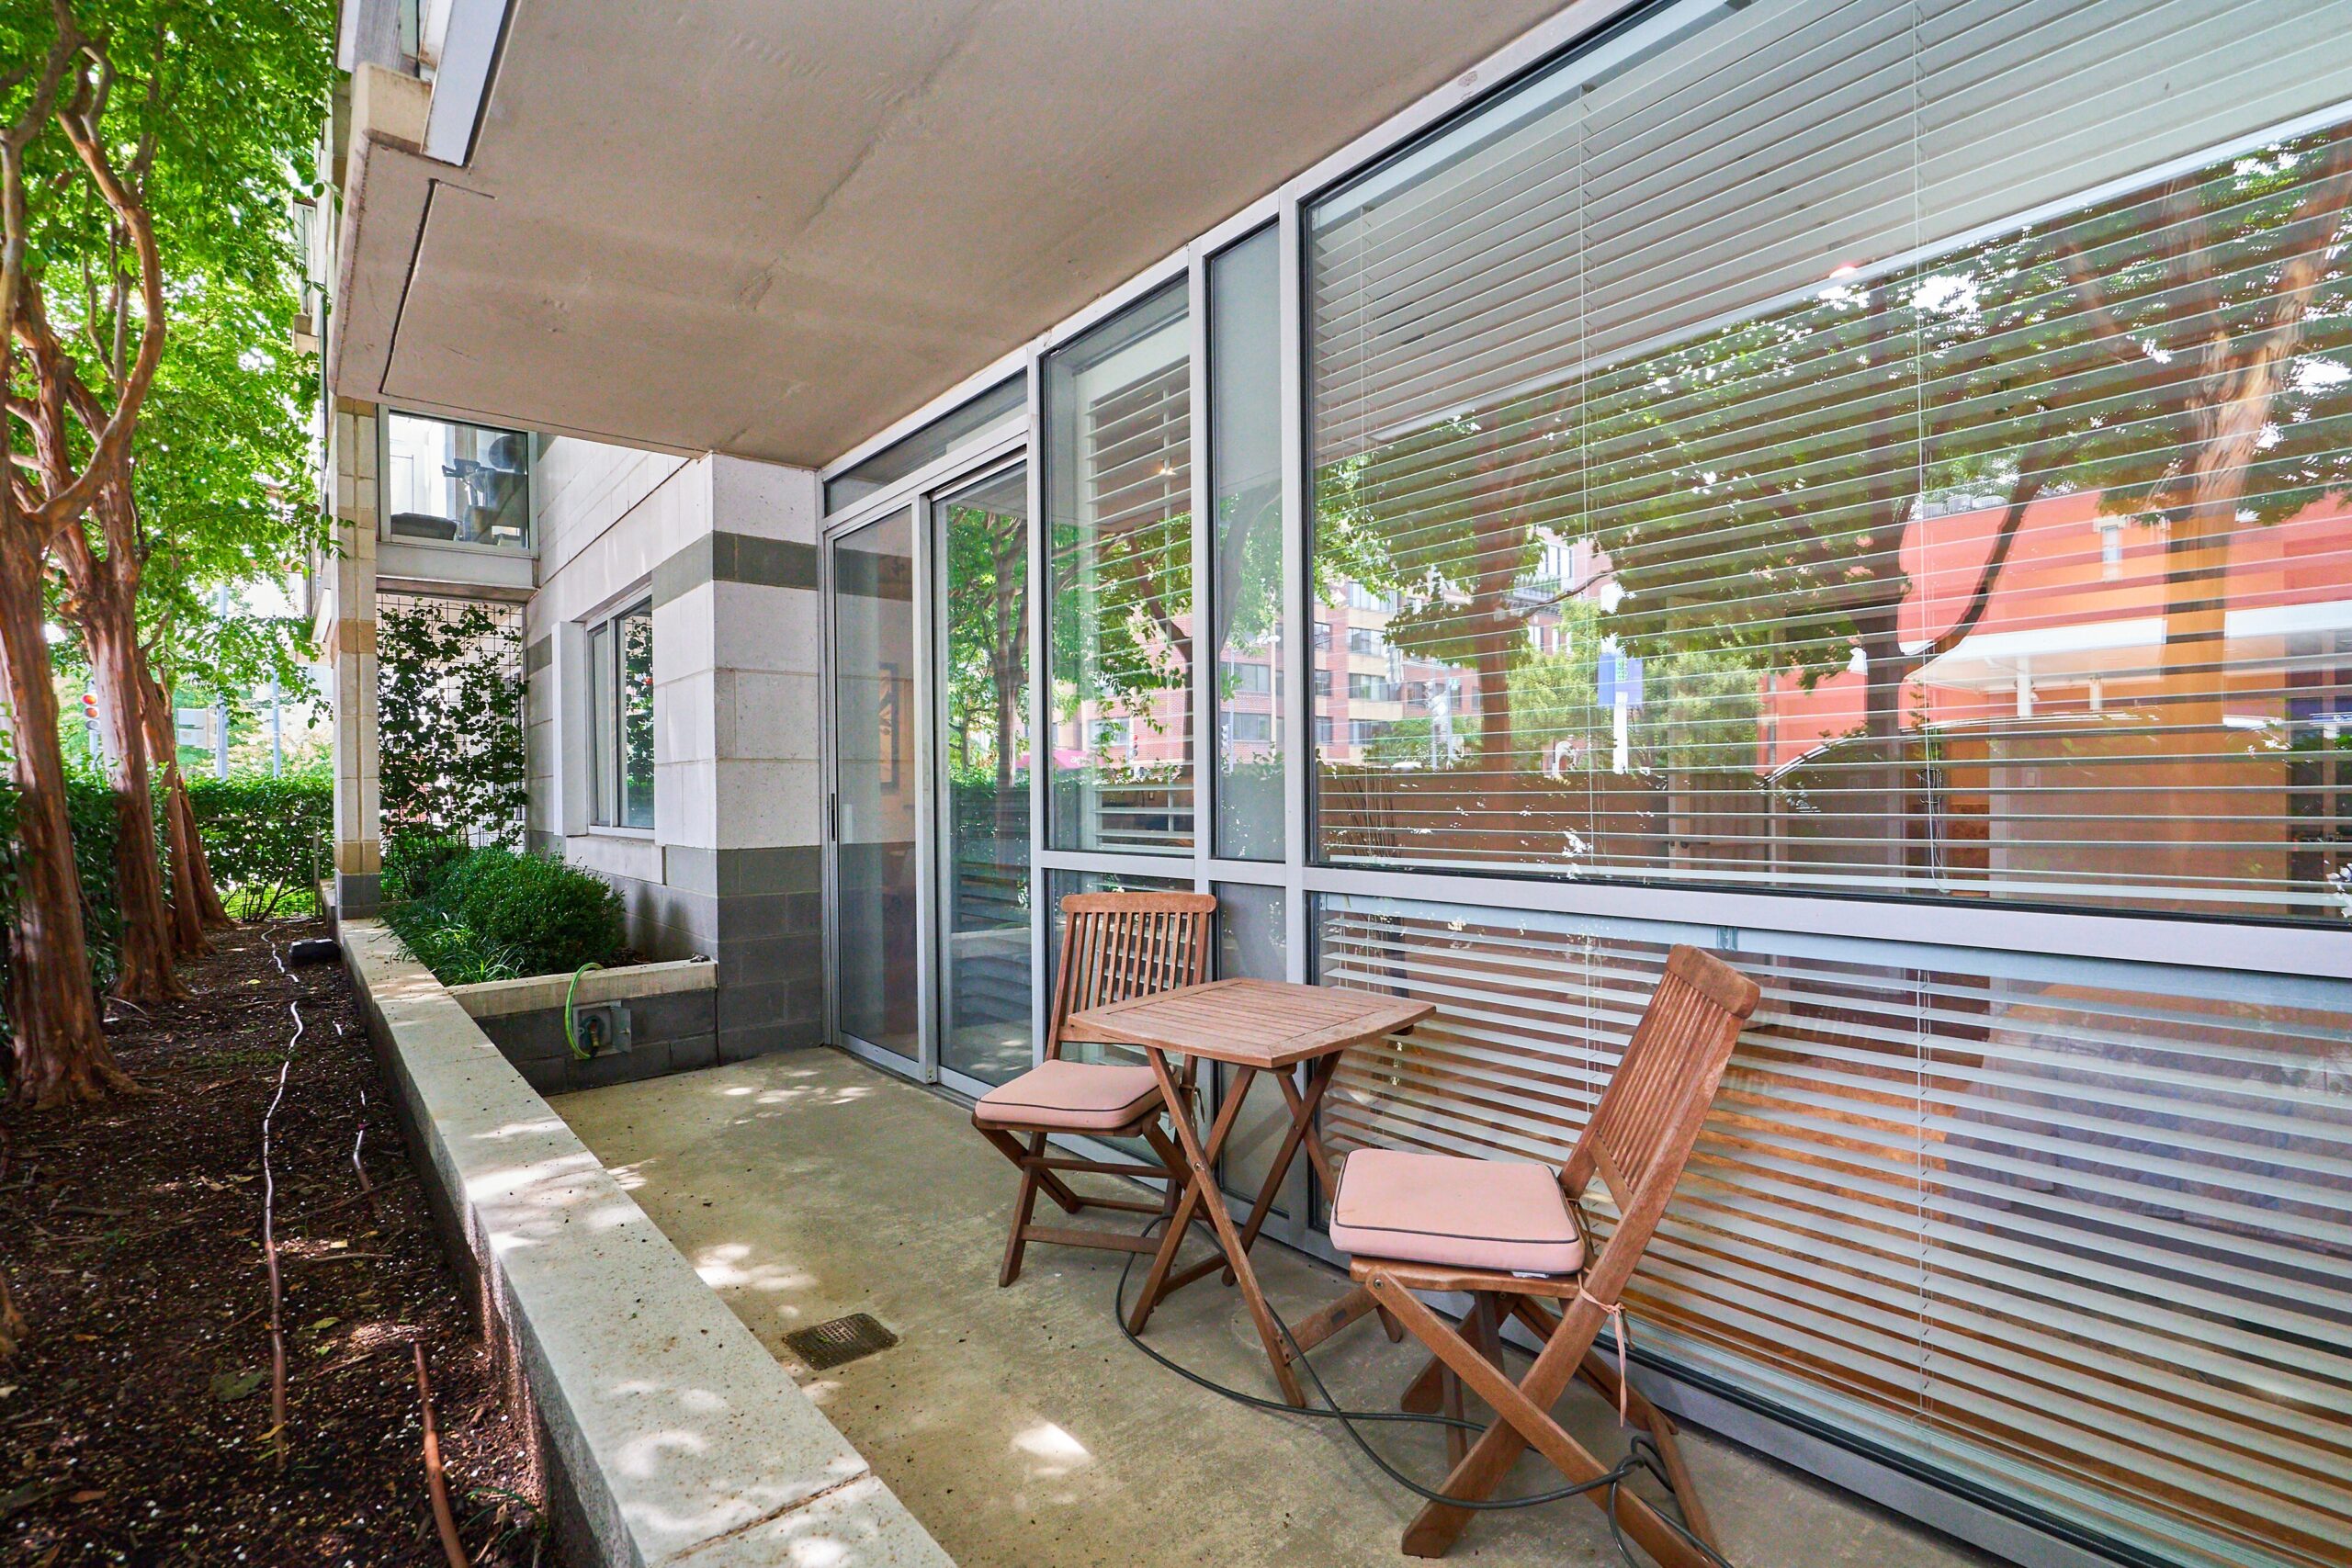 Professional exterior photo of 1300 13th St NW #102, Washington DC - showing the private patio with privacy shrubs